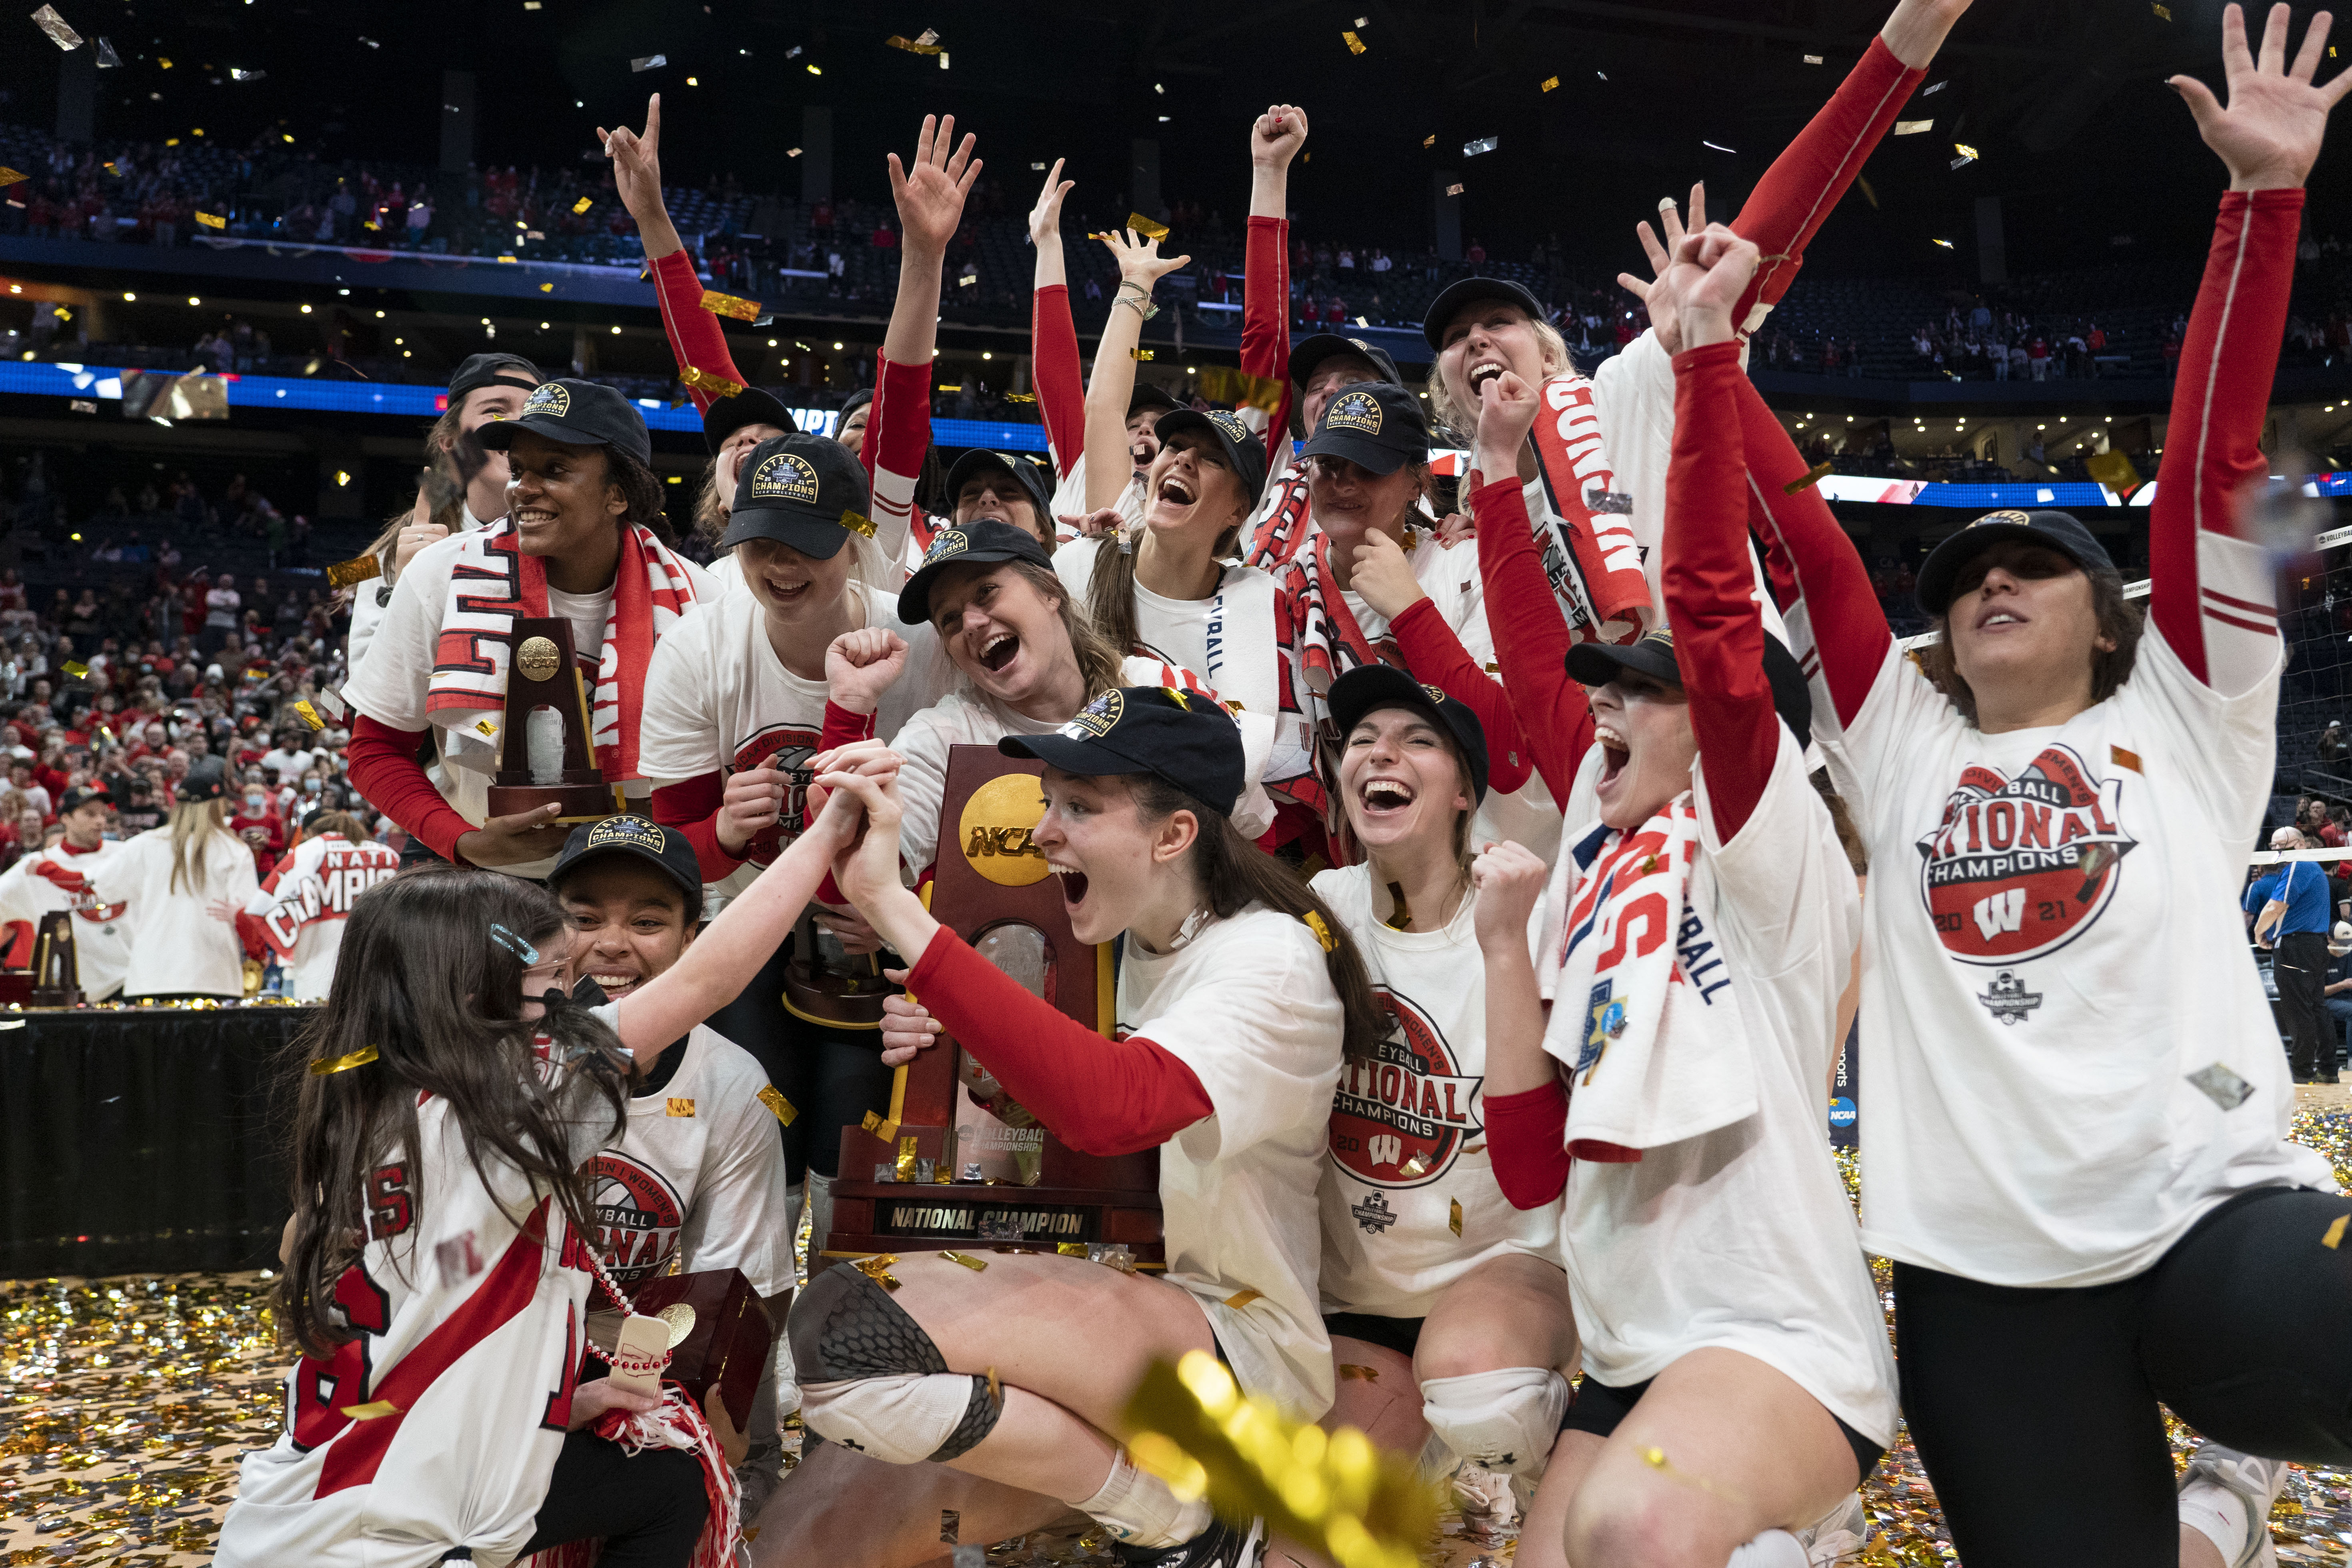 WATCH Badger volleyball champs return home to welcome celebration